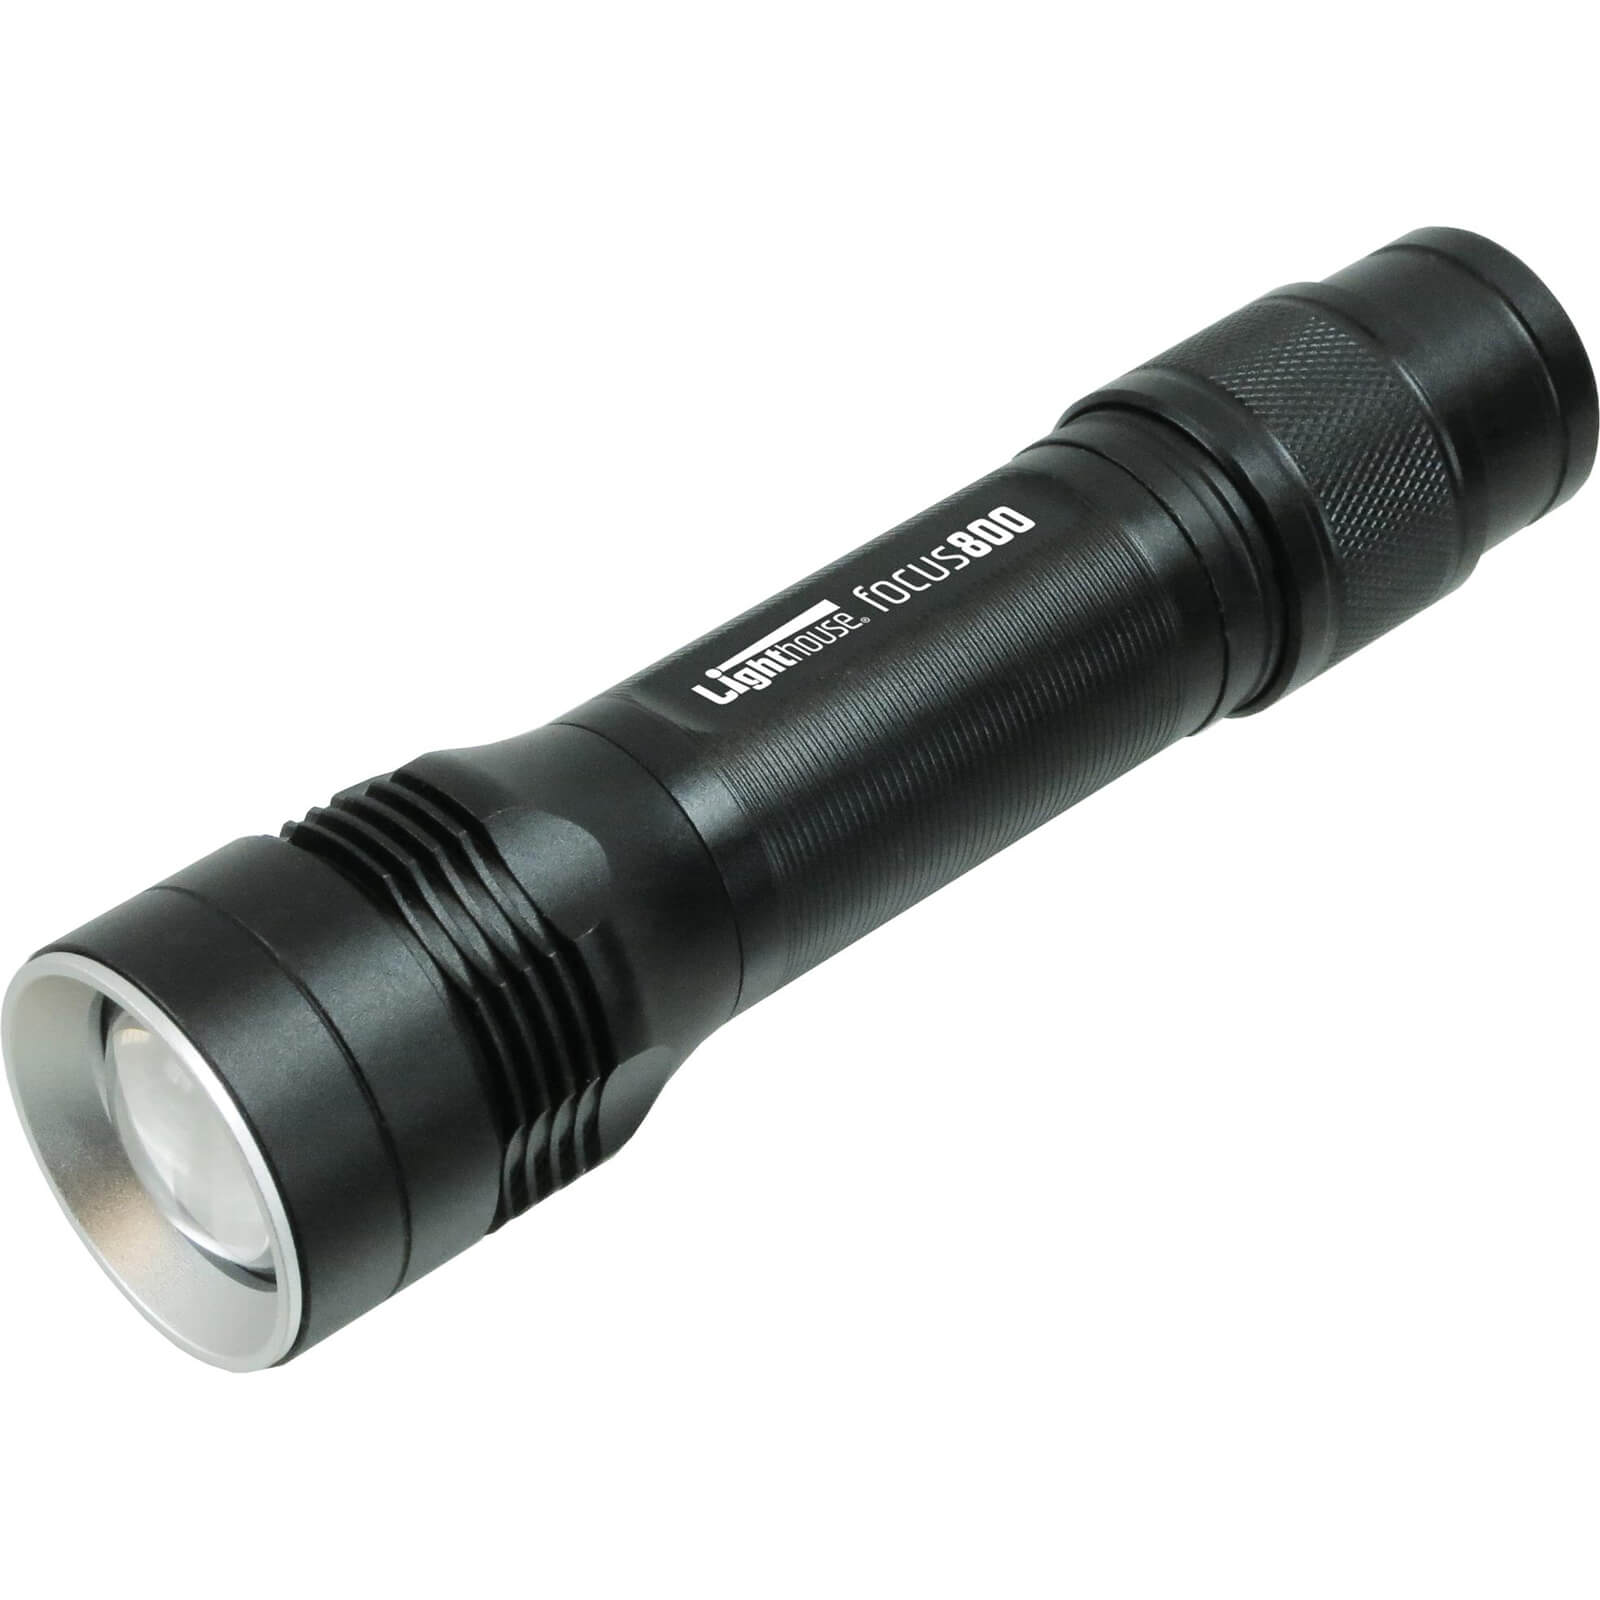 Image of Lighthouse Focus 800 Elite High Performance 800 Lumens LED Rechargeable Torch Black